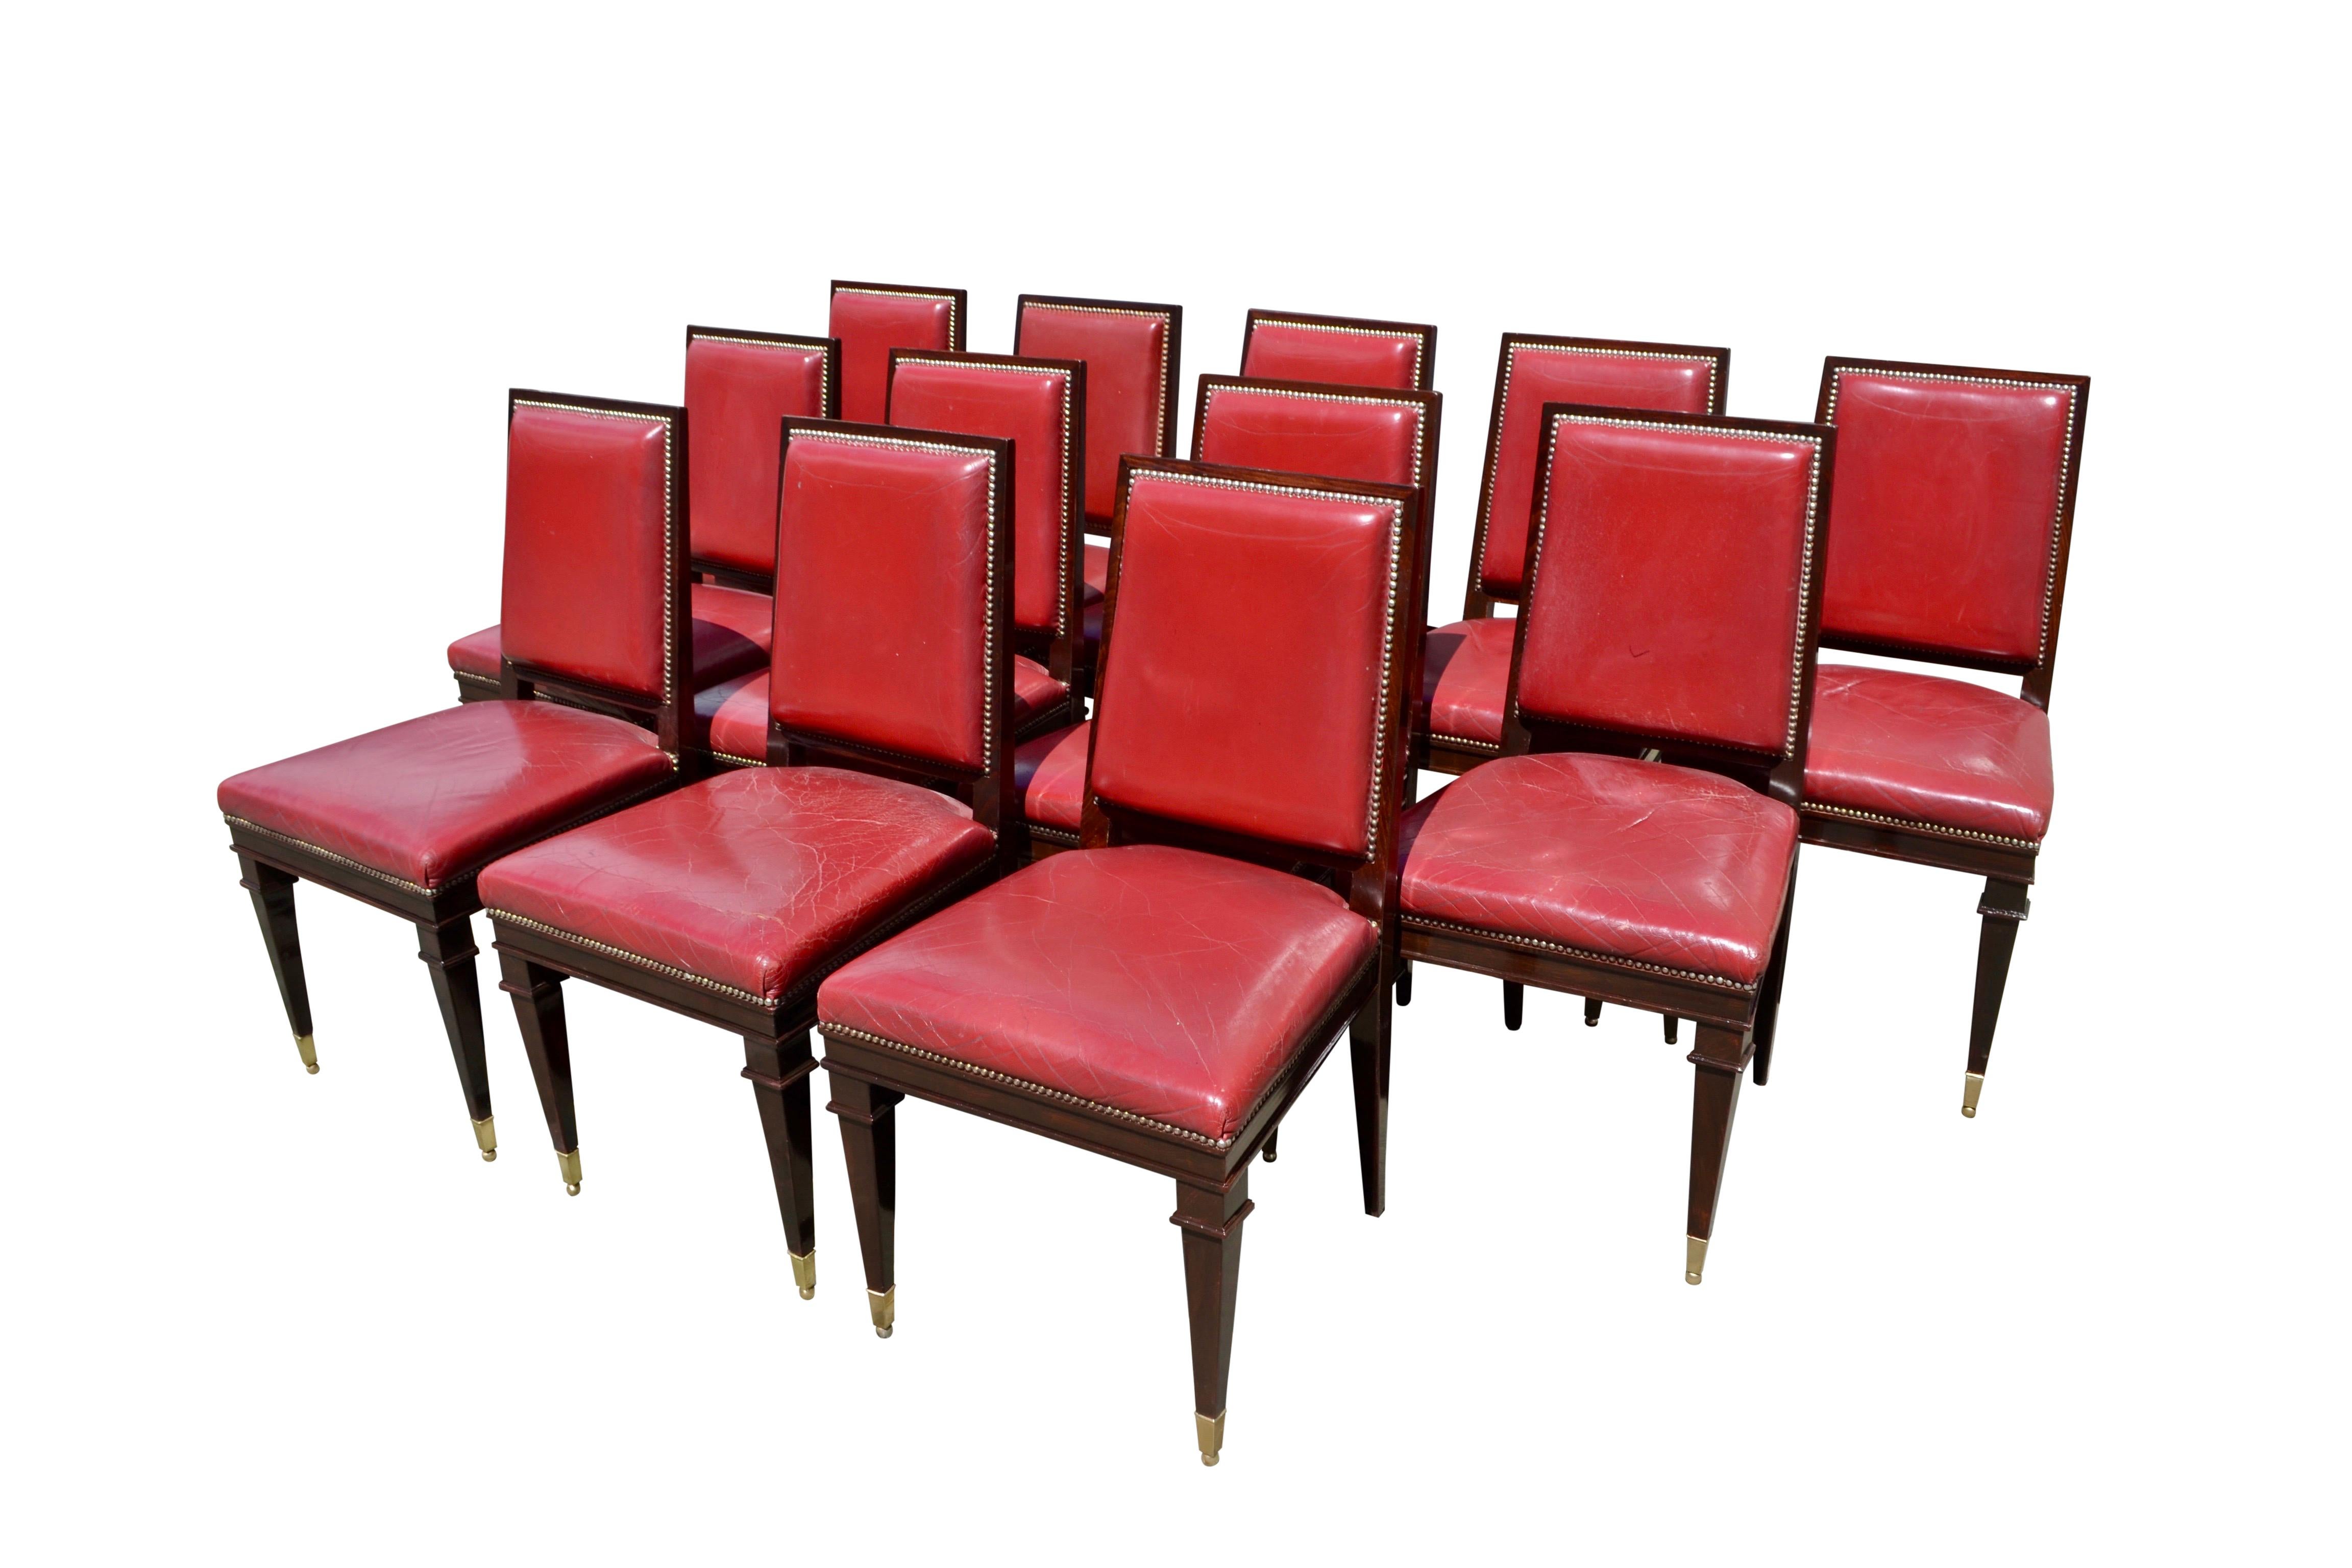 Set of 12 Art Deco Mahogany Framed Red Leather Chairs In Good Condition For Sale In Vancouver, British Columbia